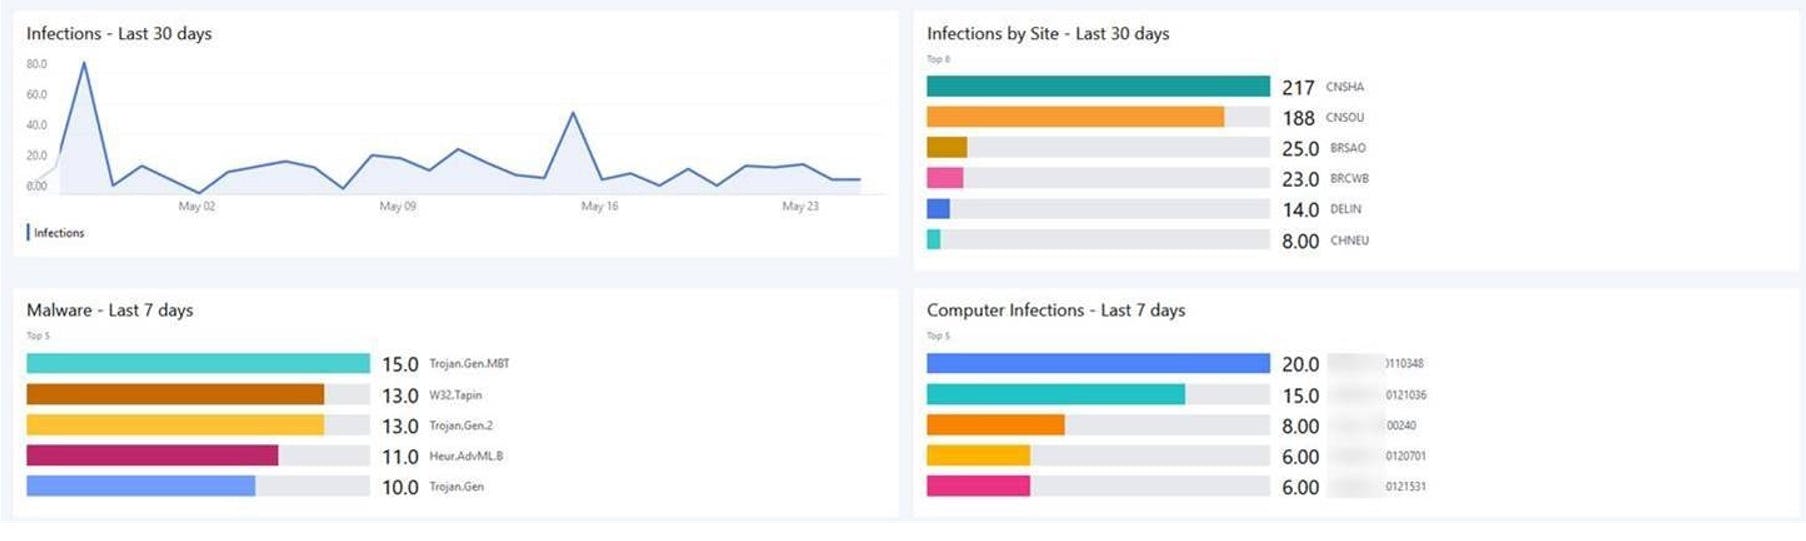 Symantec endpoint protection dashboard - infections, malware, computer infections